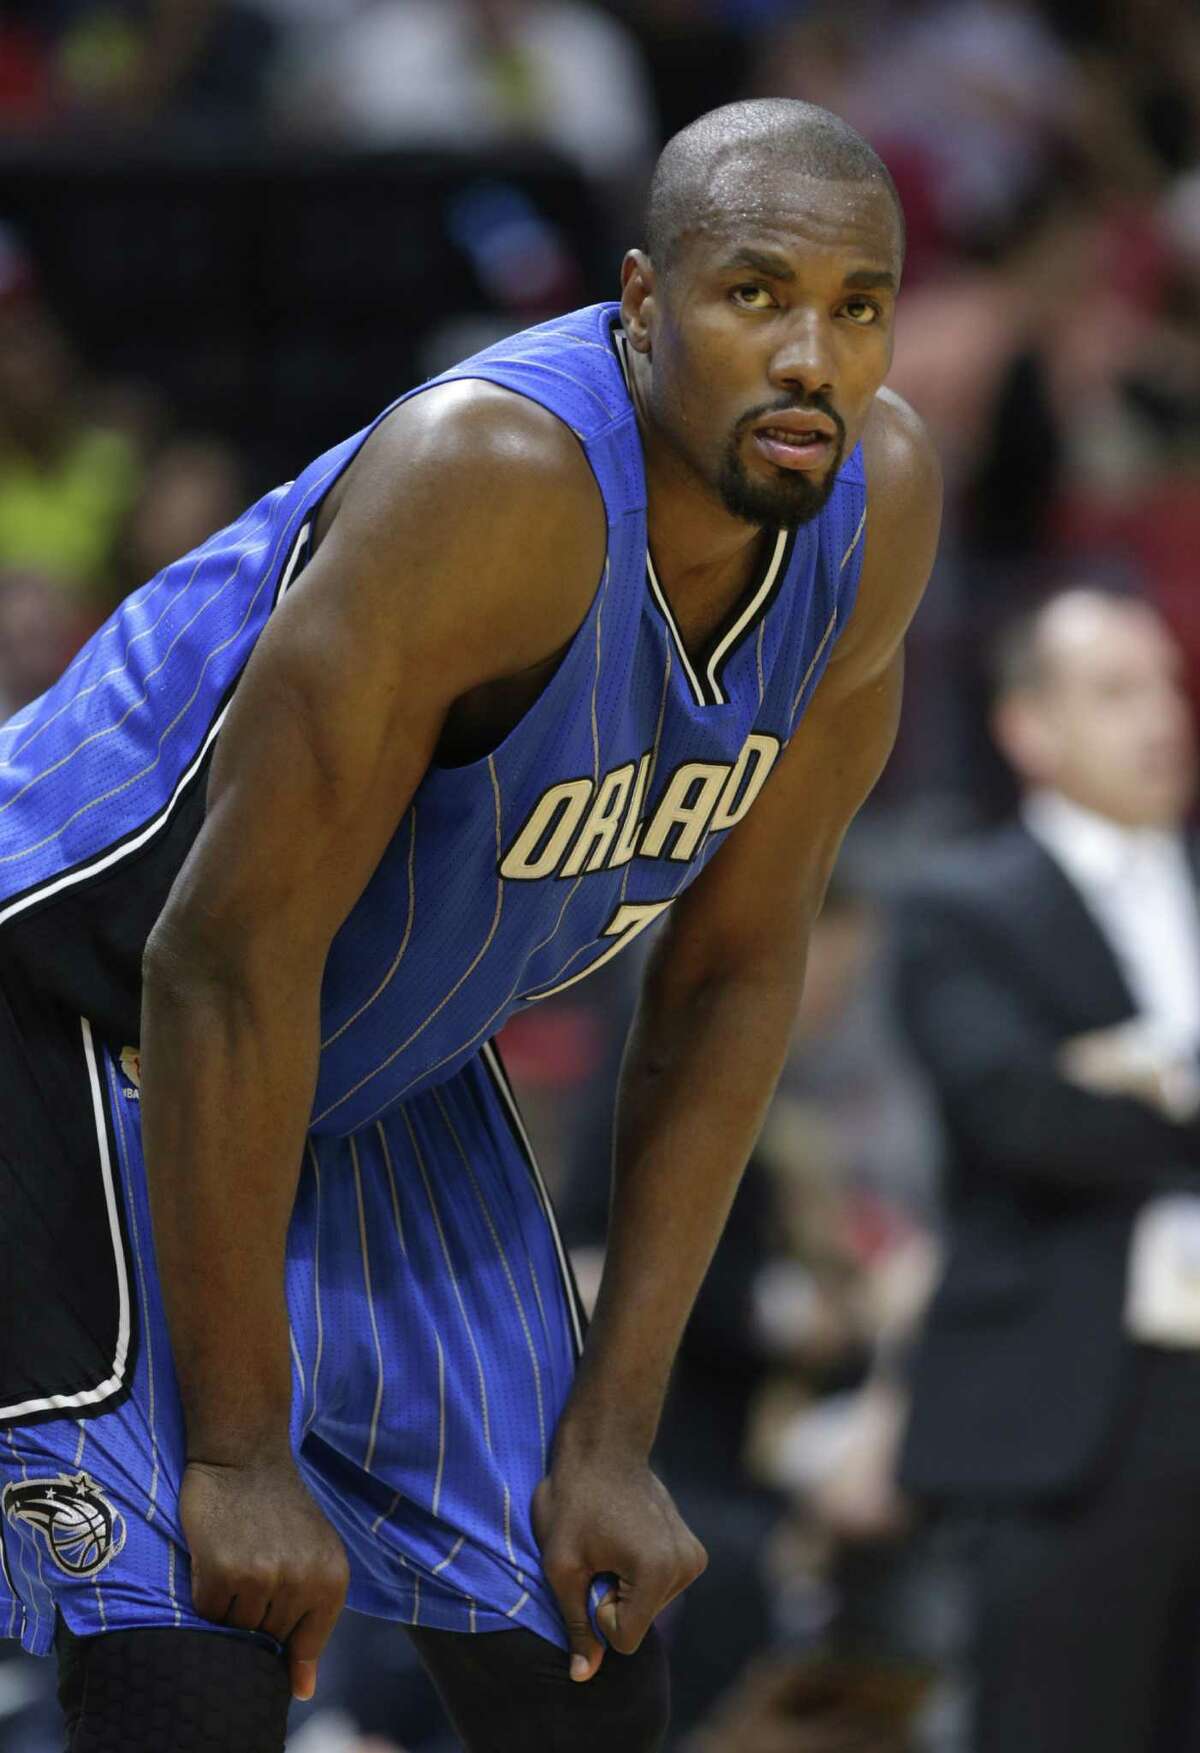 Orlando Magic’s Serge Ibaka takes a breather during the second half against the Heat on Feb. 13, 2017, in Miami.